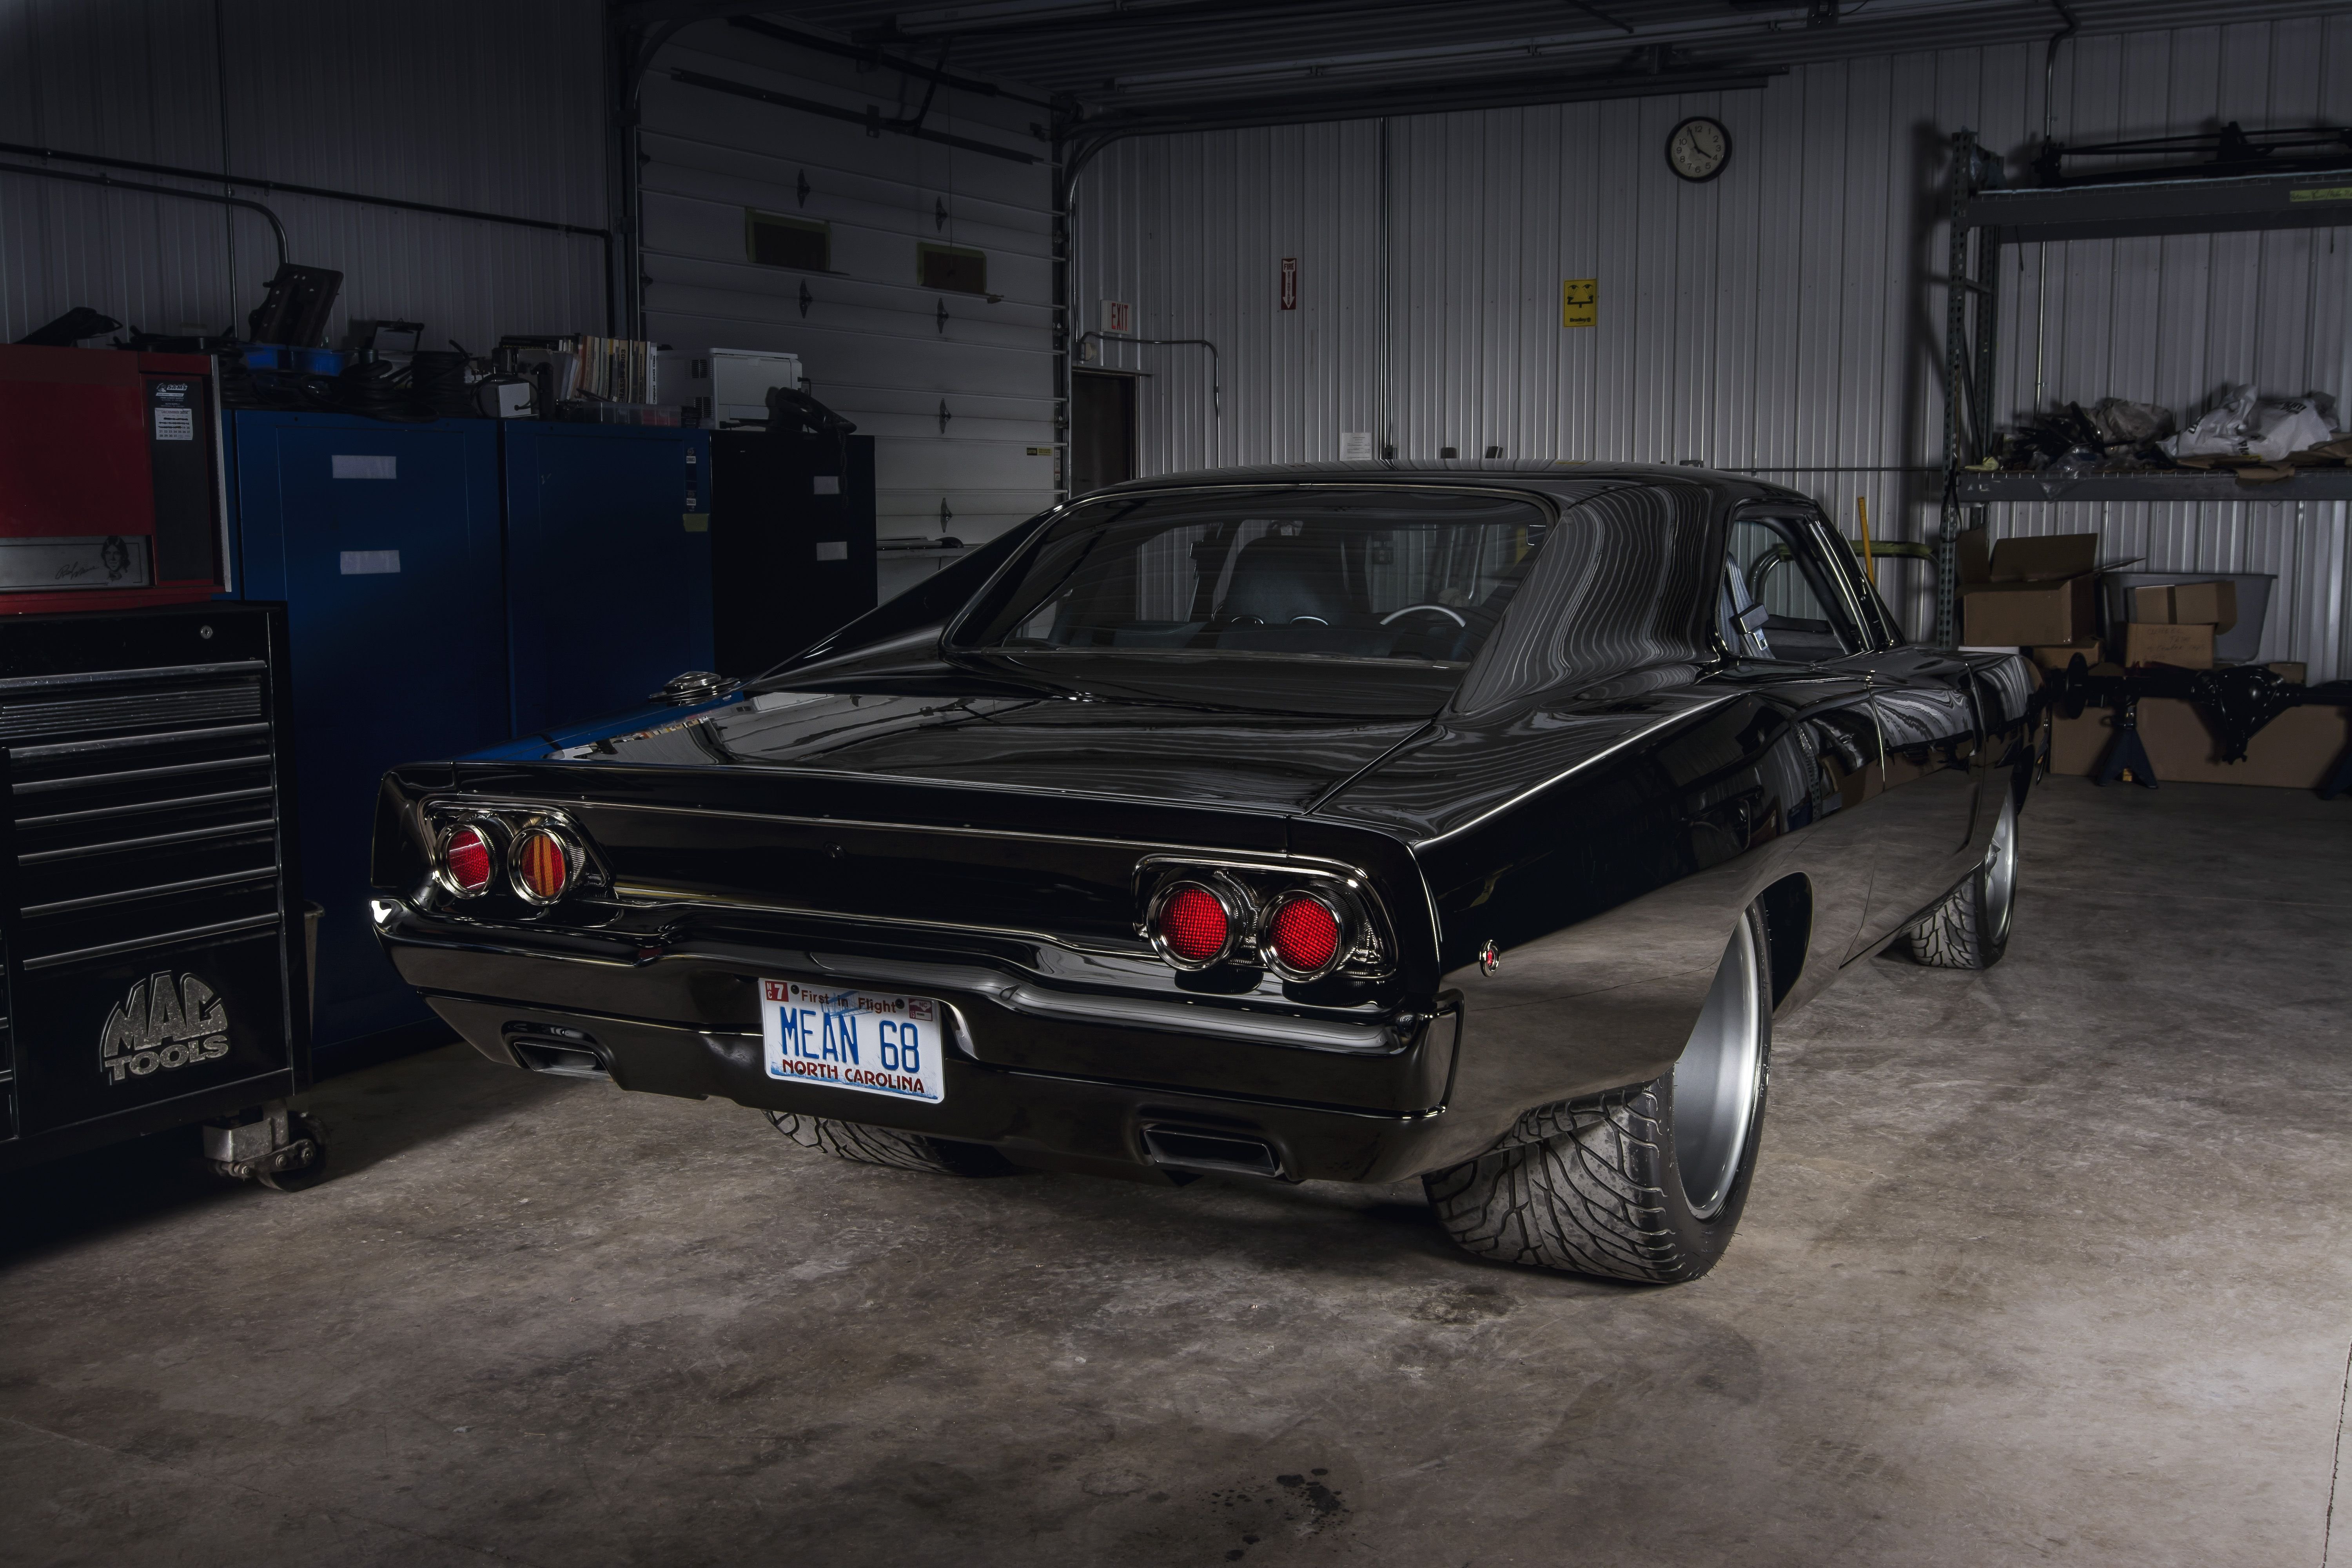 Dodge Charger RT, Dodge, Muscle cars, American cars, Dodge Charger R T 1968, Old car, Garage Wallpaper